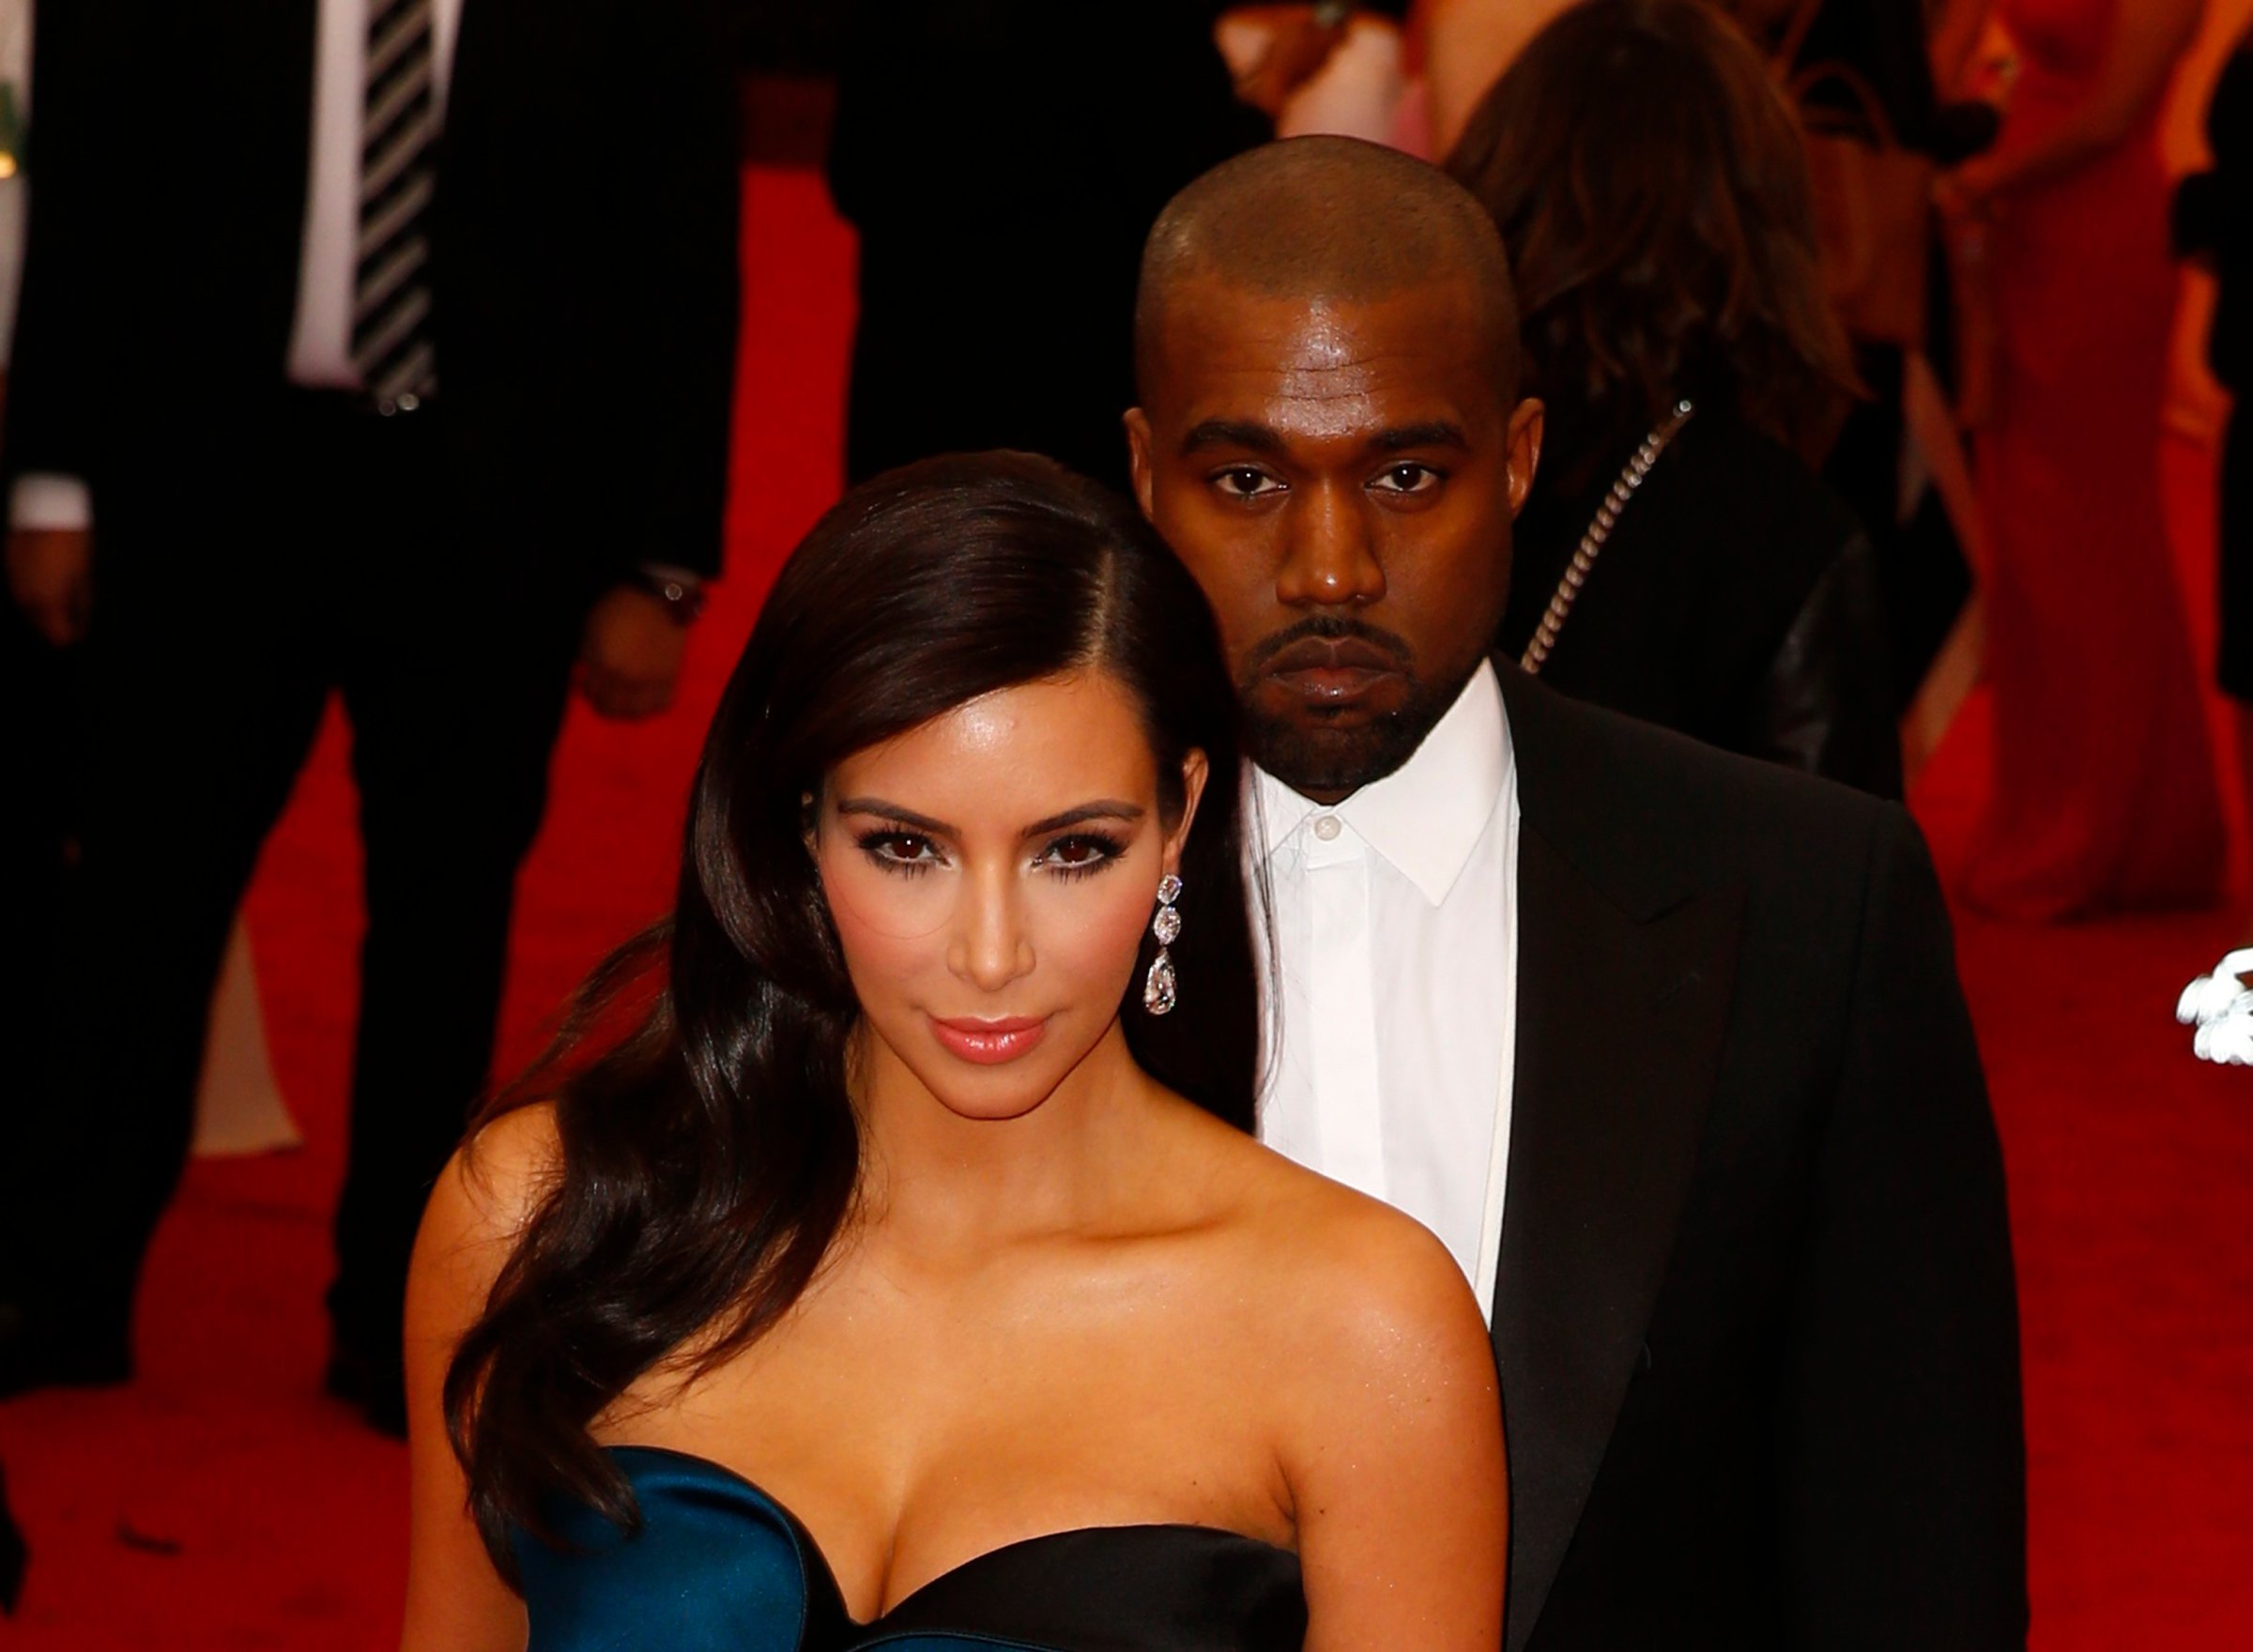 Kim Kardashian and Kanye West arrive at the Metropolitan Museum of Art Costume Institute Gala Benefit celebrating the opening of "Charles James: Beyond Fashion" in New York